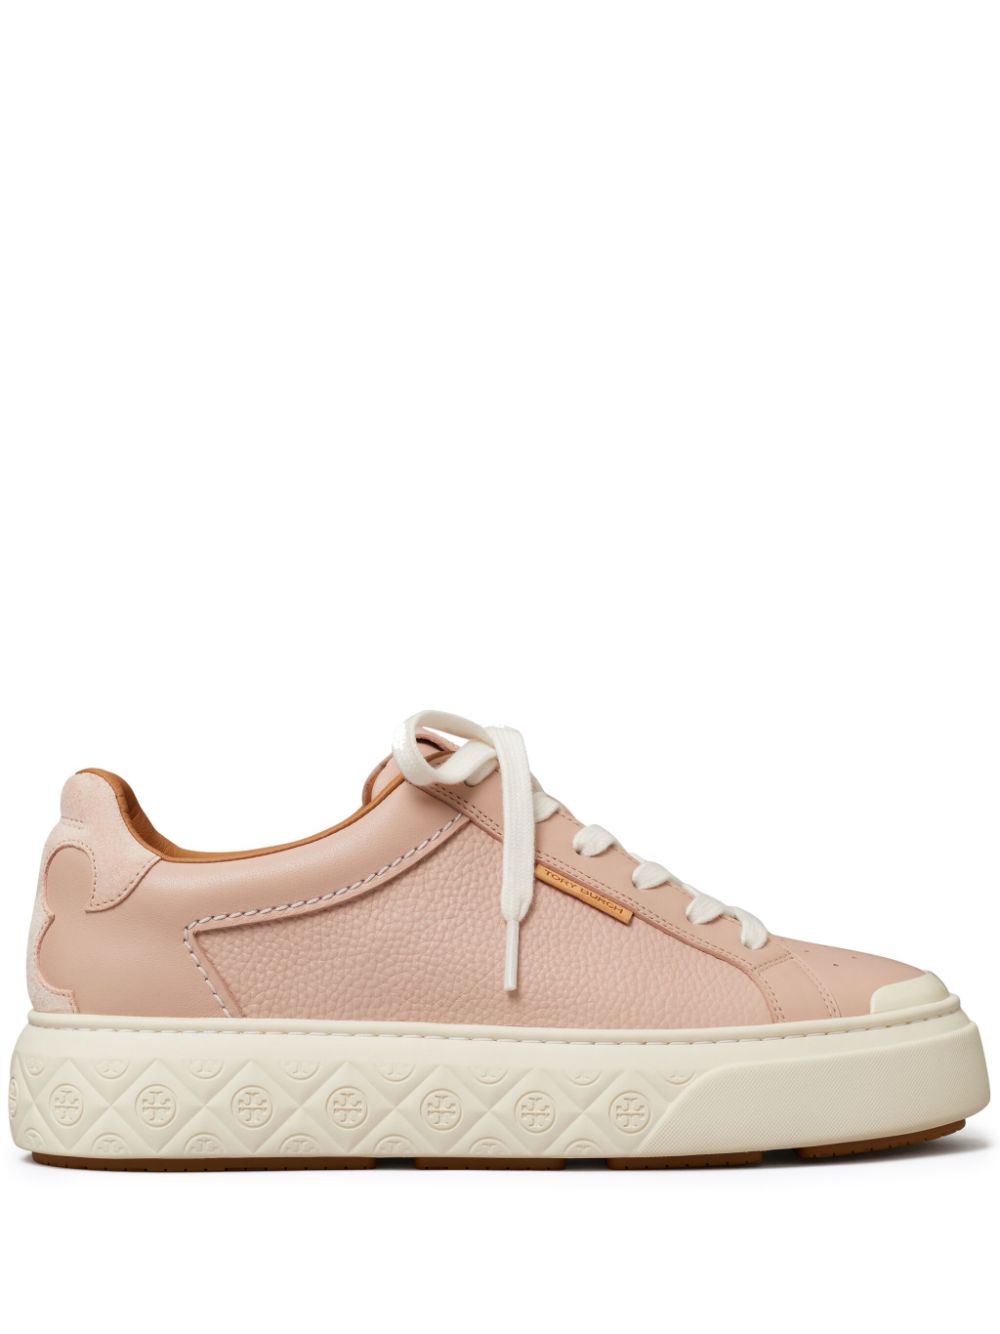 Tory Burch Ladybug leather sneakers - Pink von Tory Burch